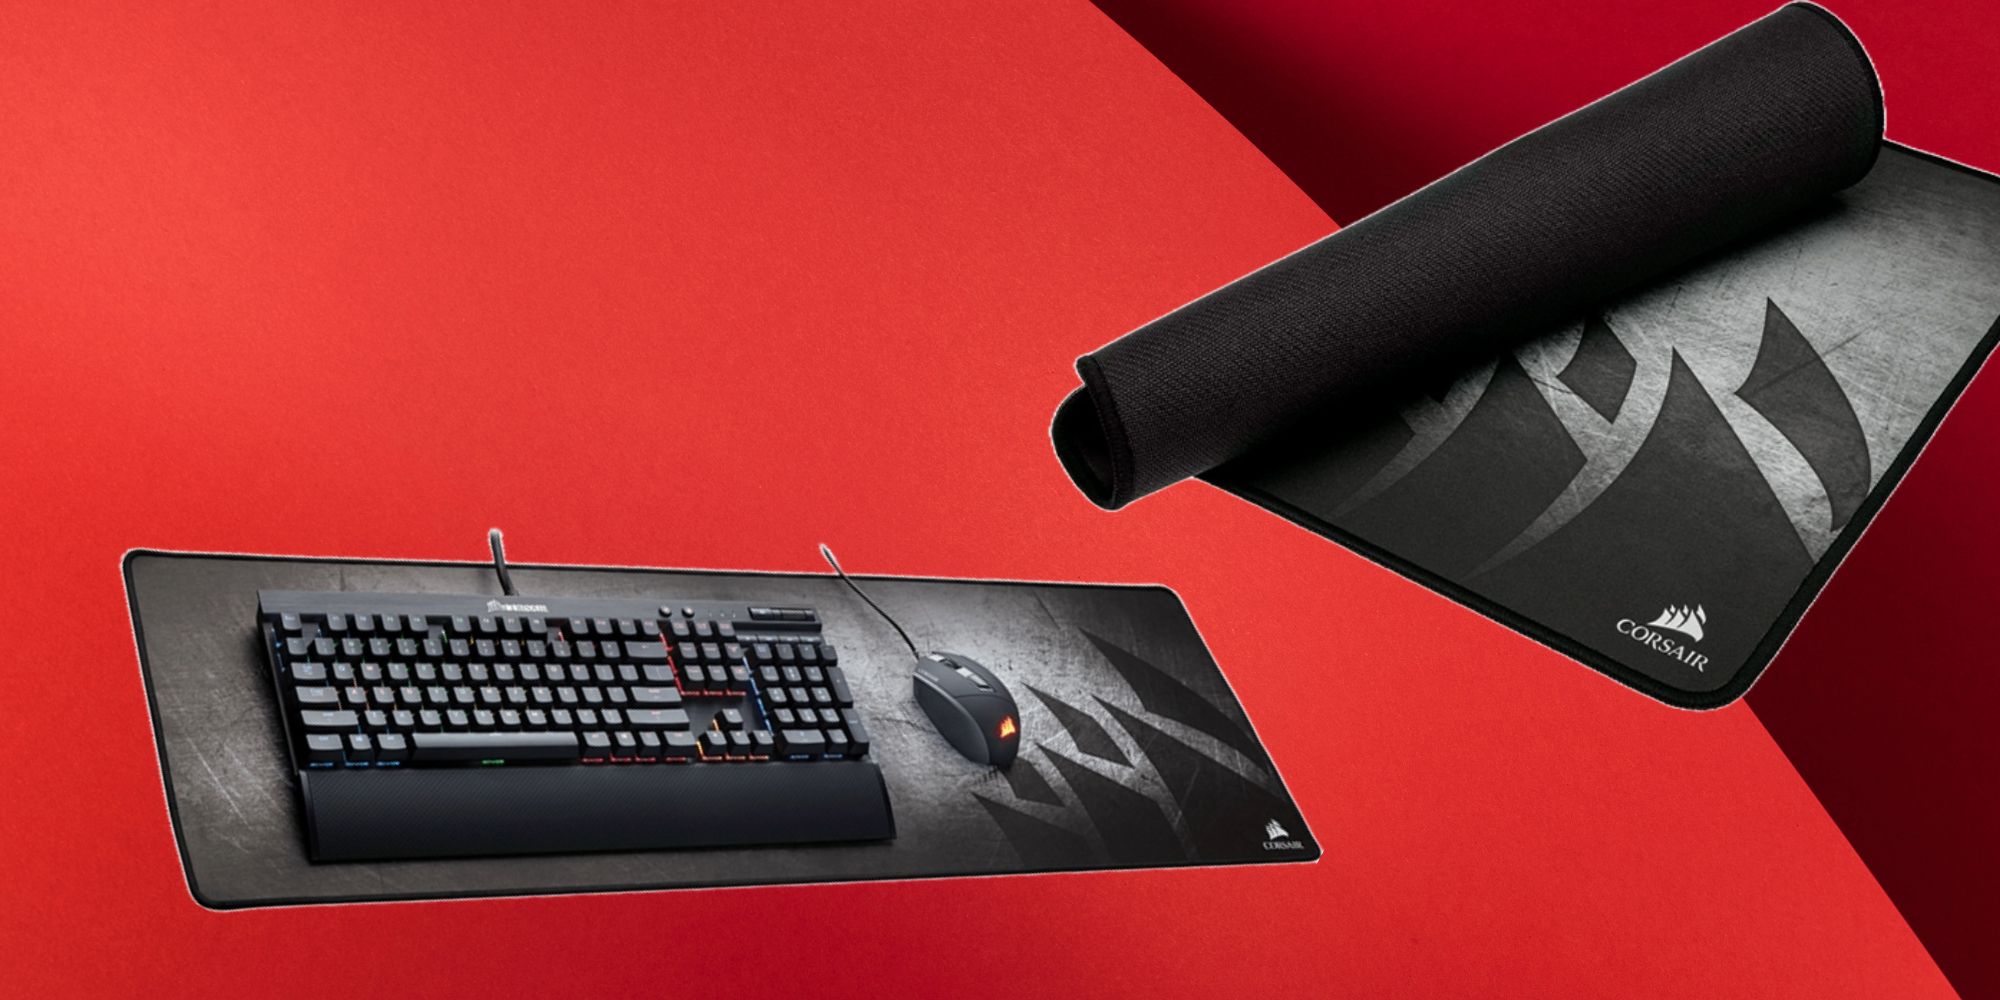 A grey and black cloth mouse pad with the Corsair logo in the corner, striking against a red background.